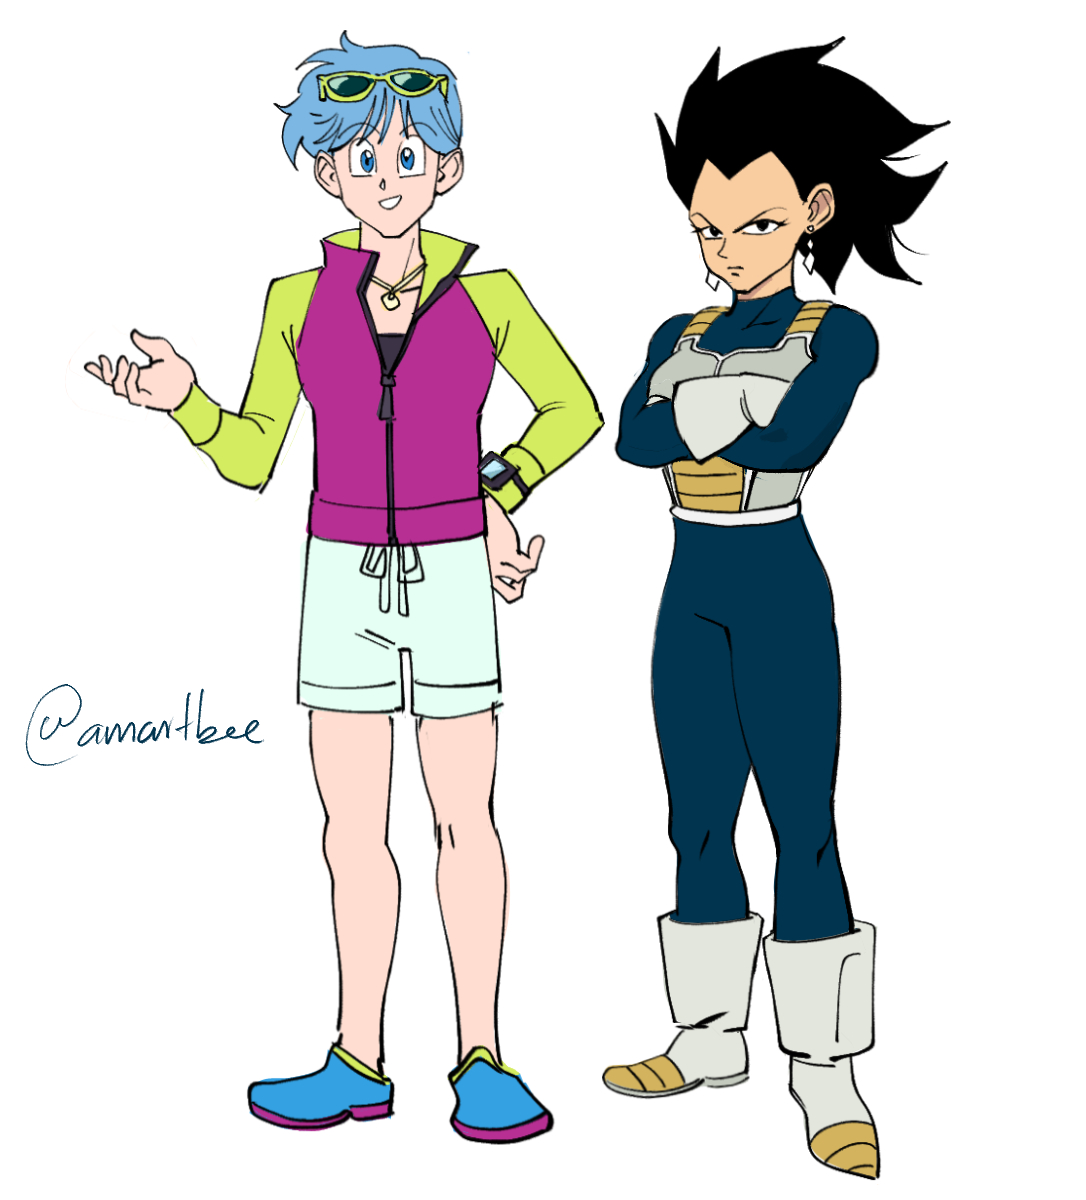 895. 144. ok the last one of the night- boxers and vegeta in the broly movi...